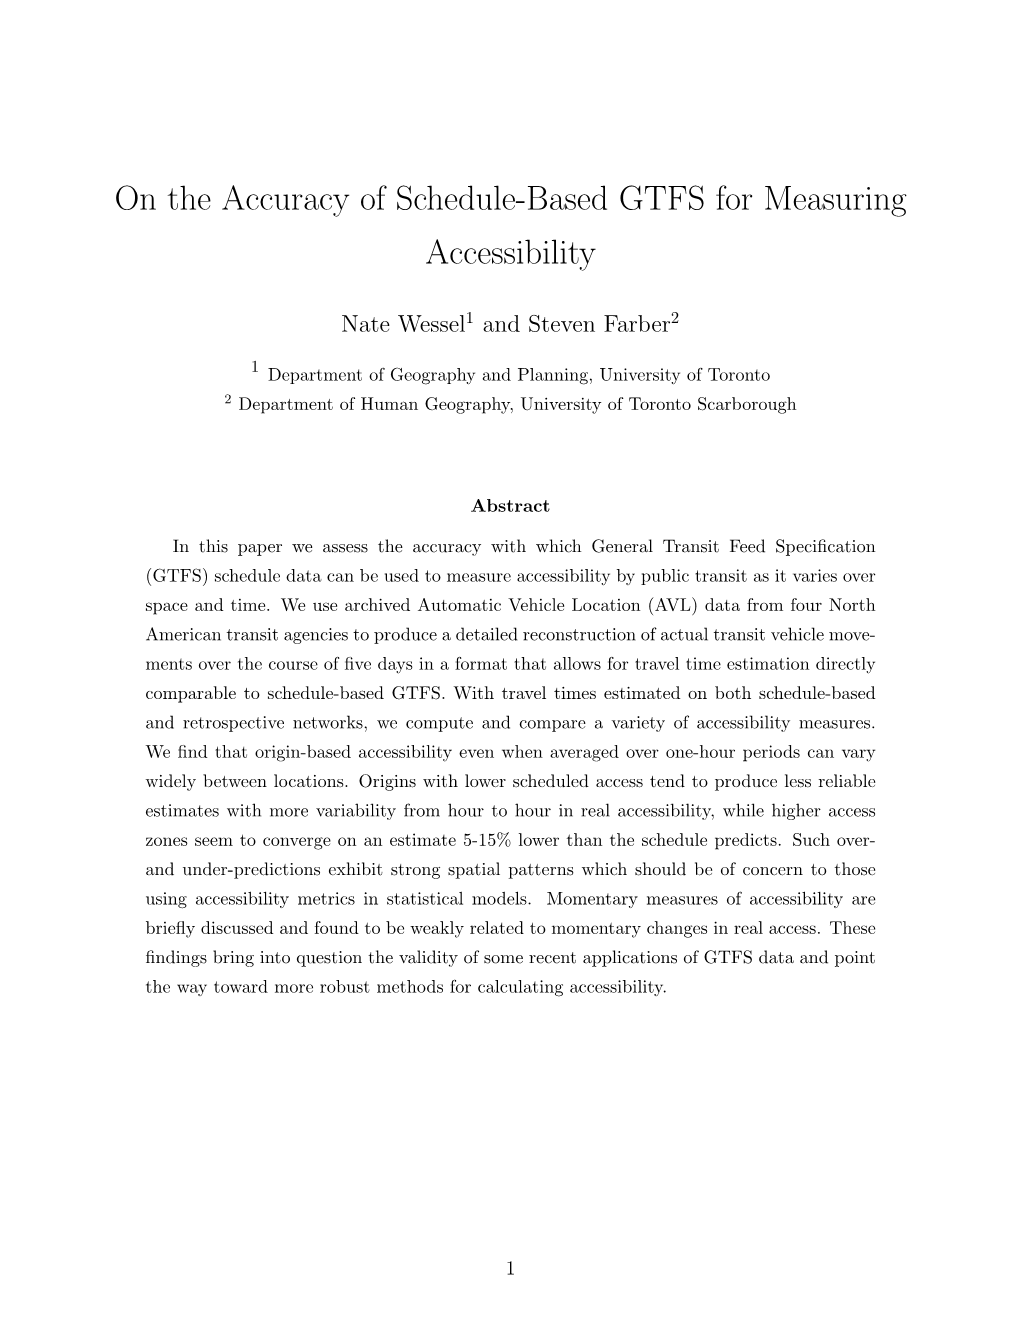 On the Accuracy of Schedule-Based GTFS for Measuring Accessibility